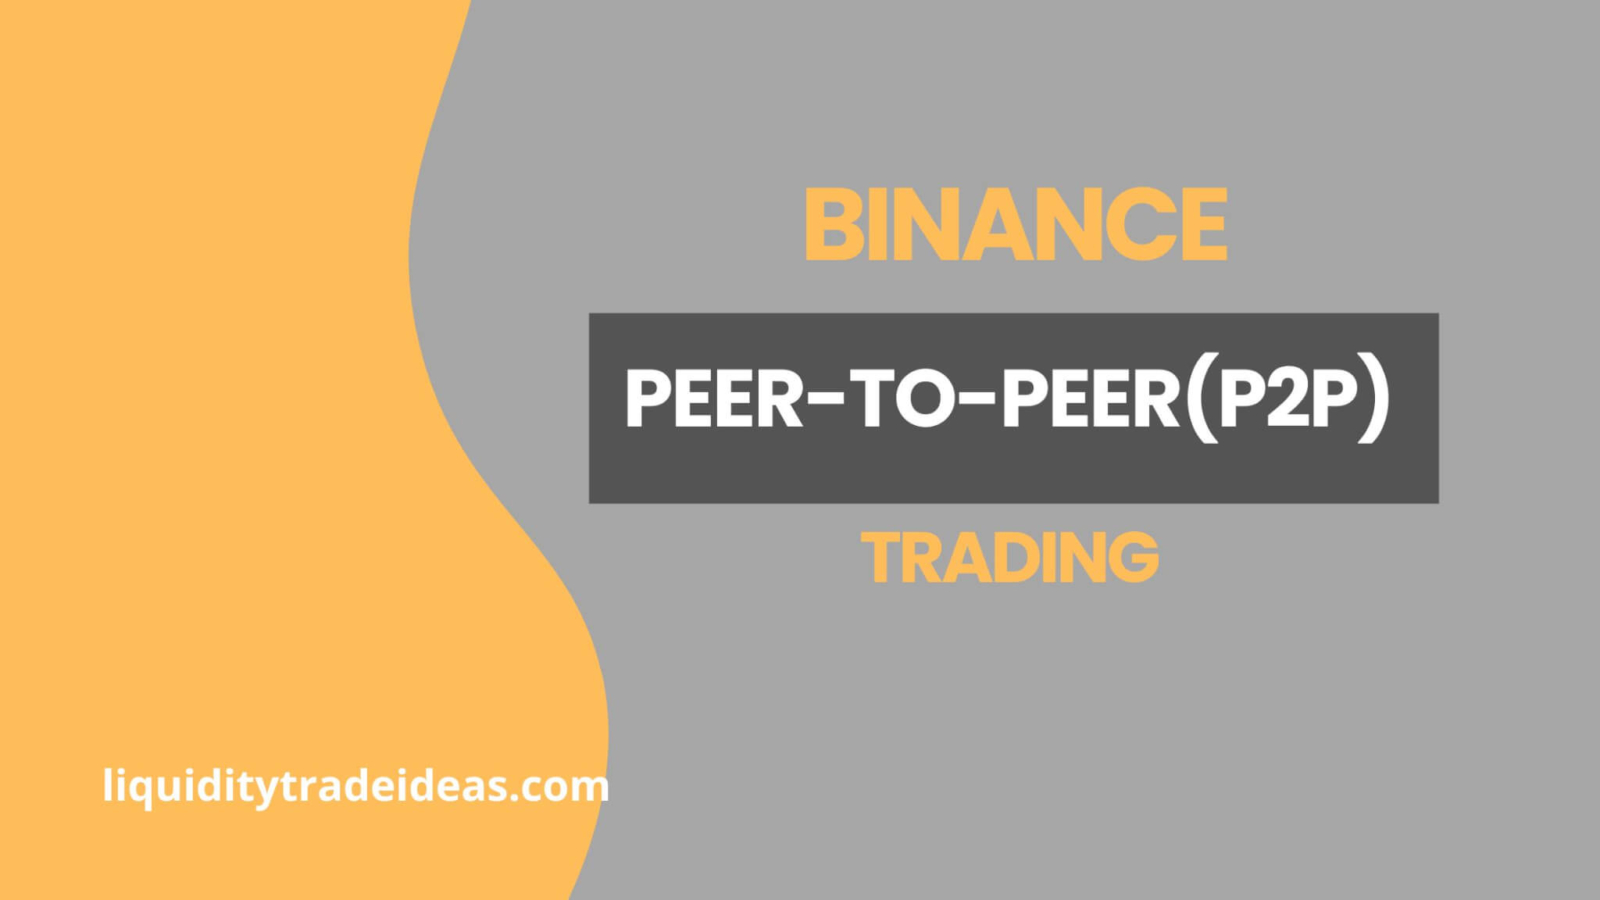 Binance p2p: What You Need To Know As A Trader.